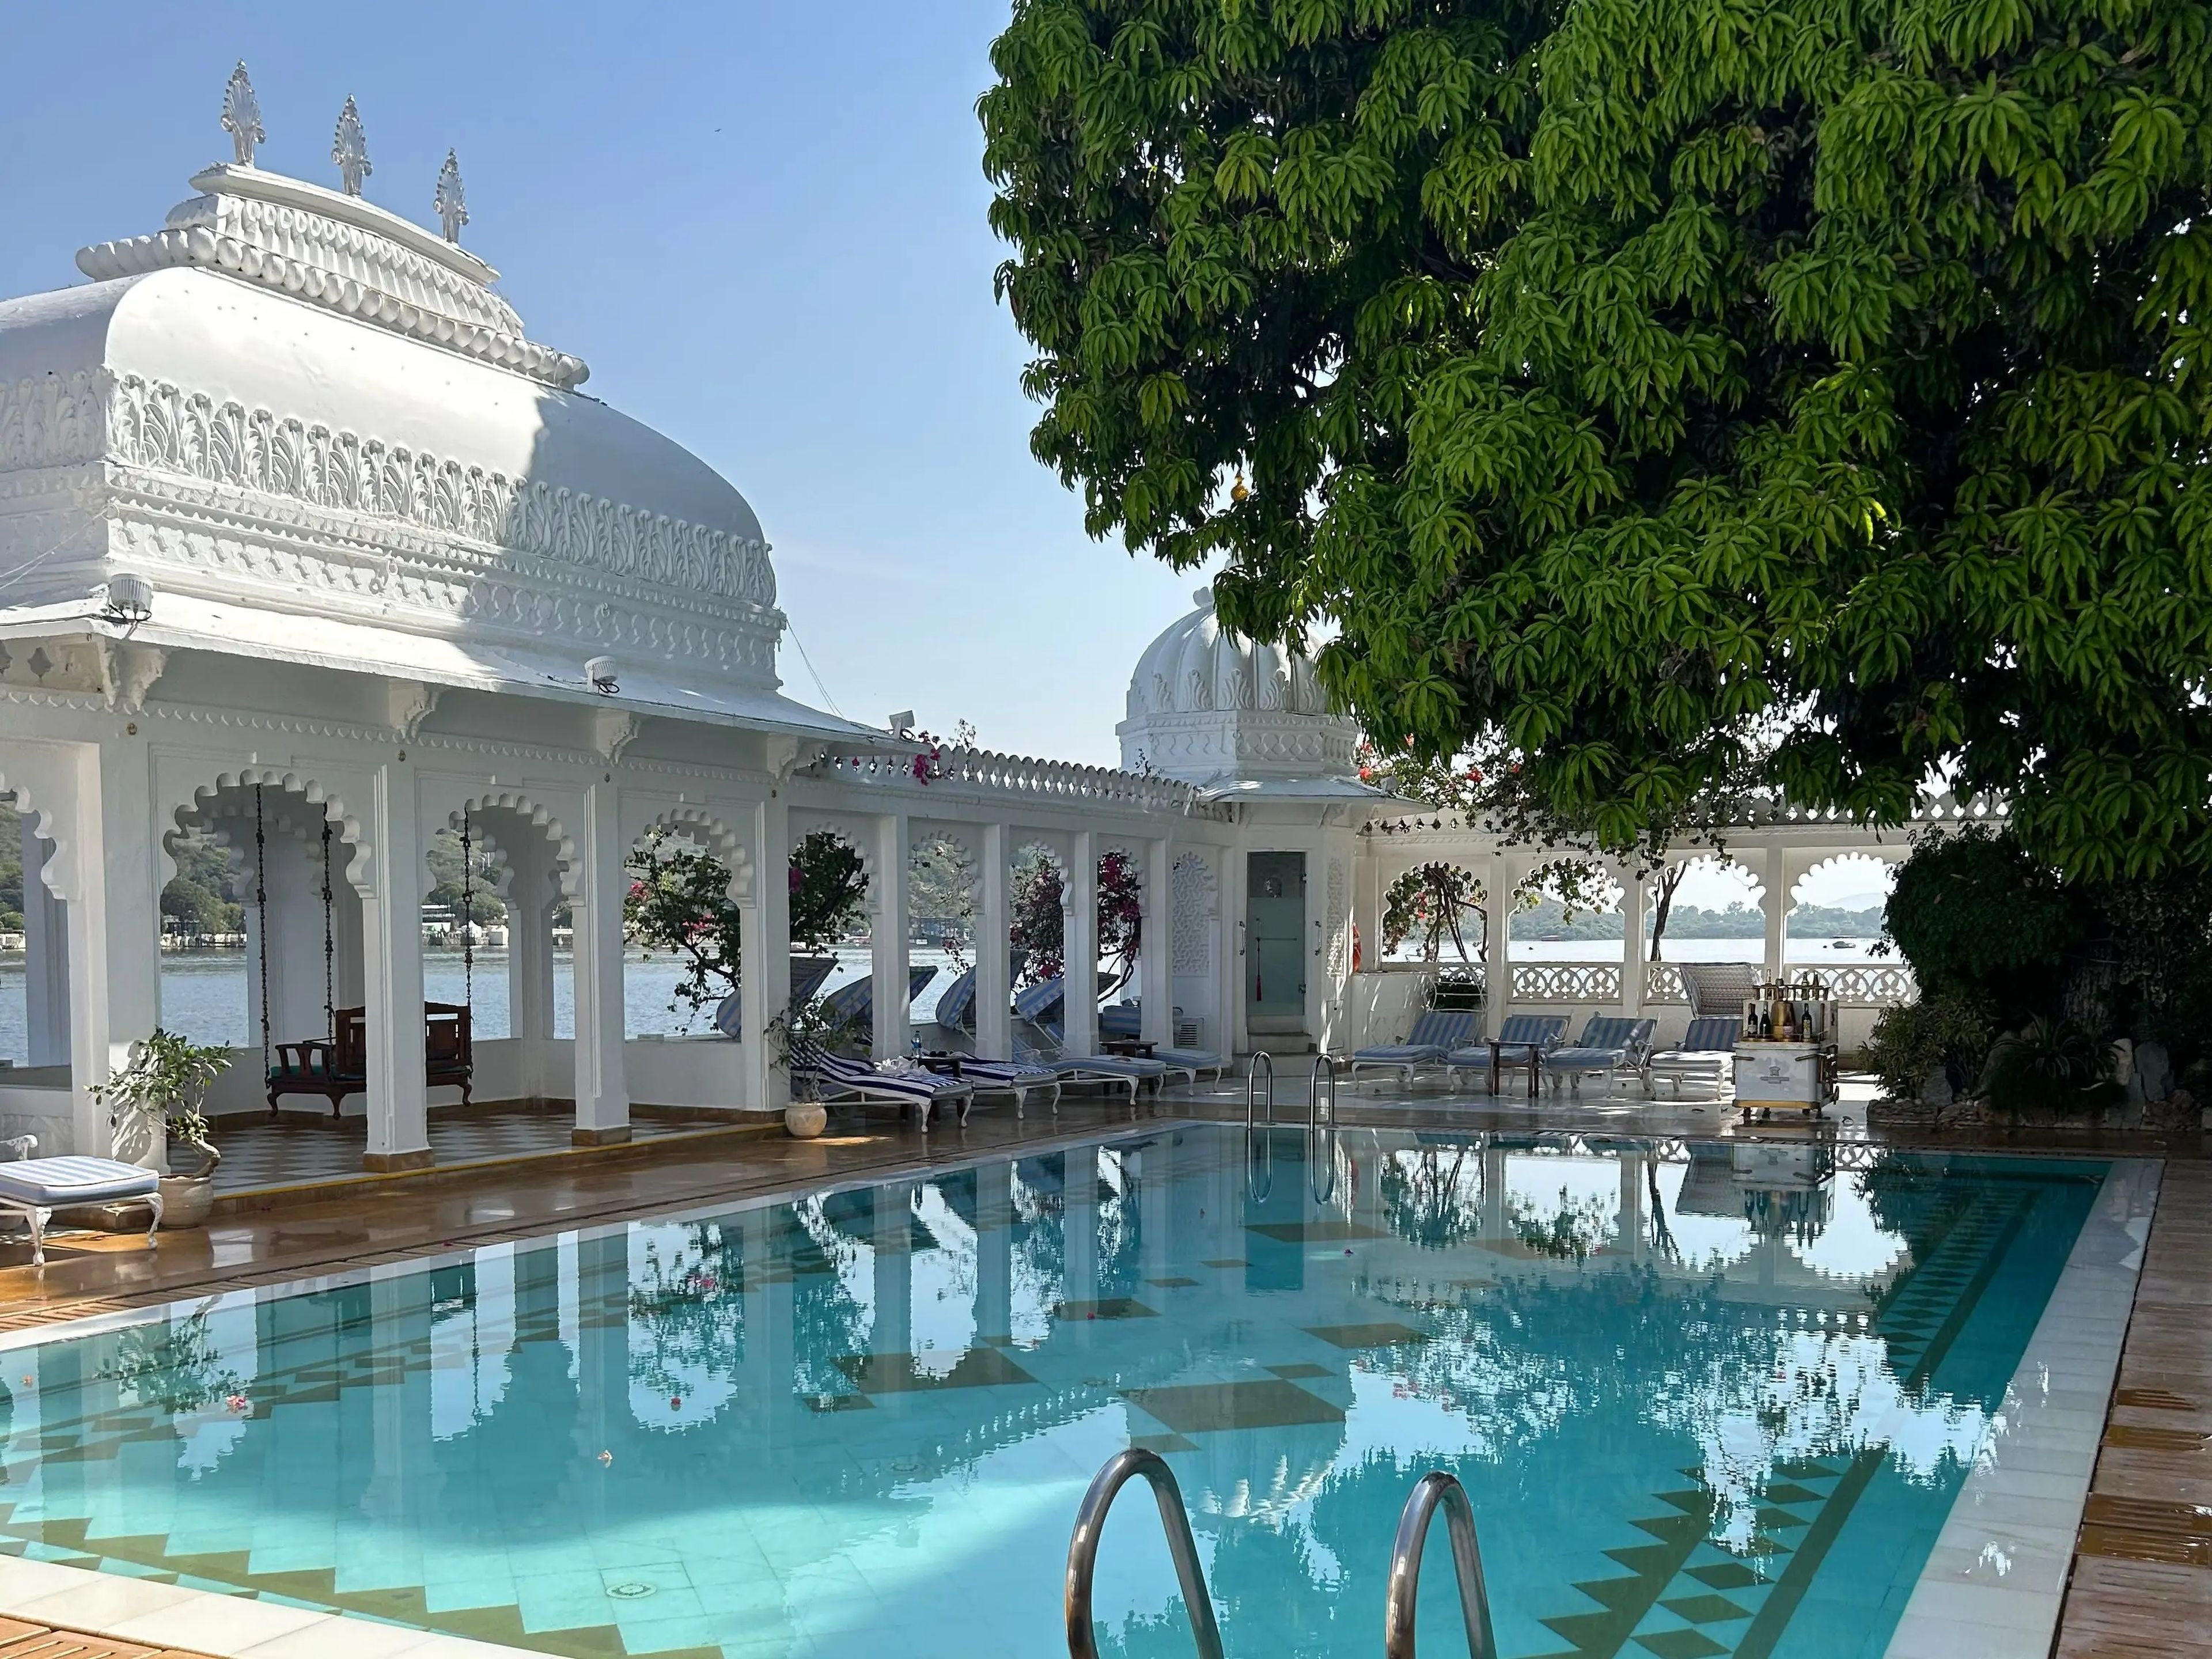 A pool surrounded by white buildings with ornate architecture and a large tree.